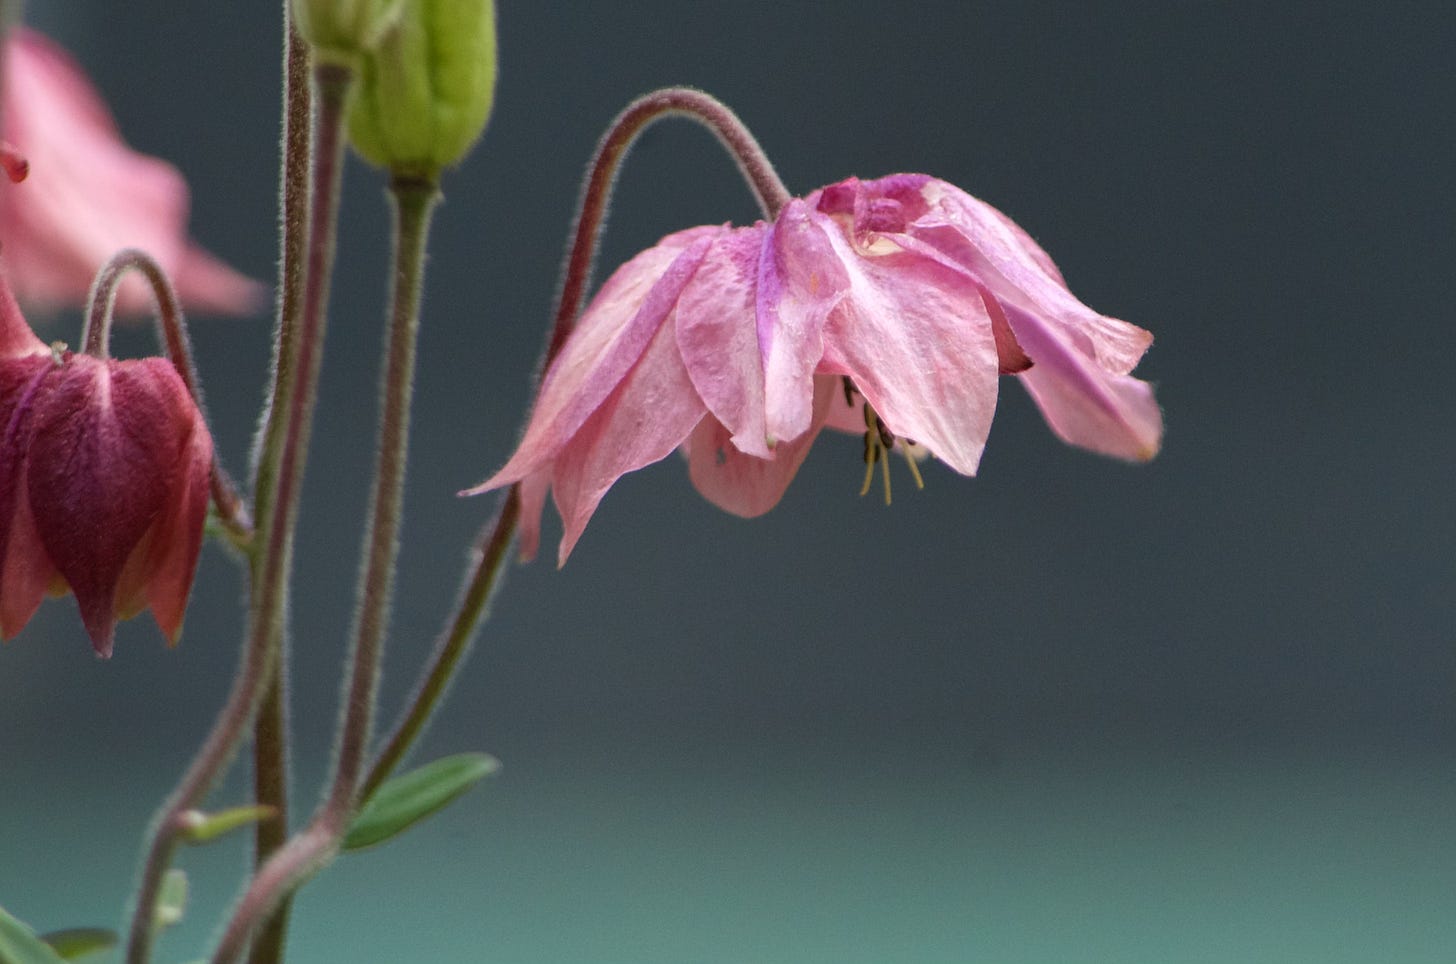 A close-up of a pink Meadow Rue blossom against a soft charcoal background.